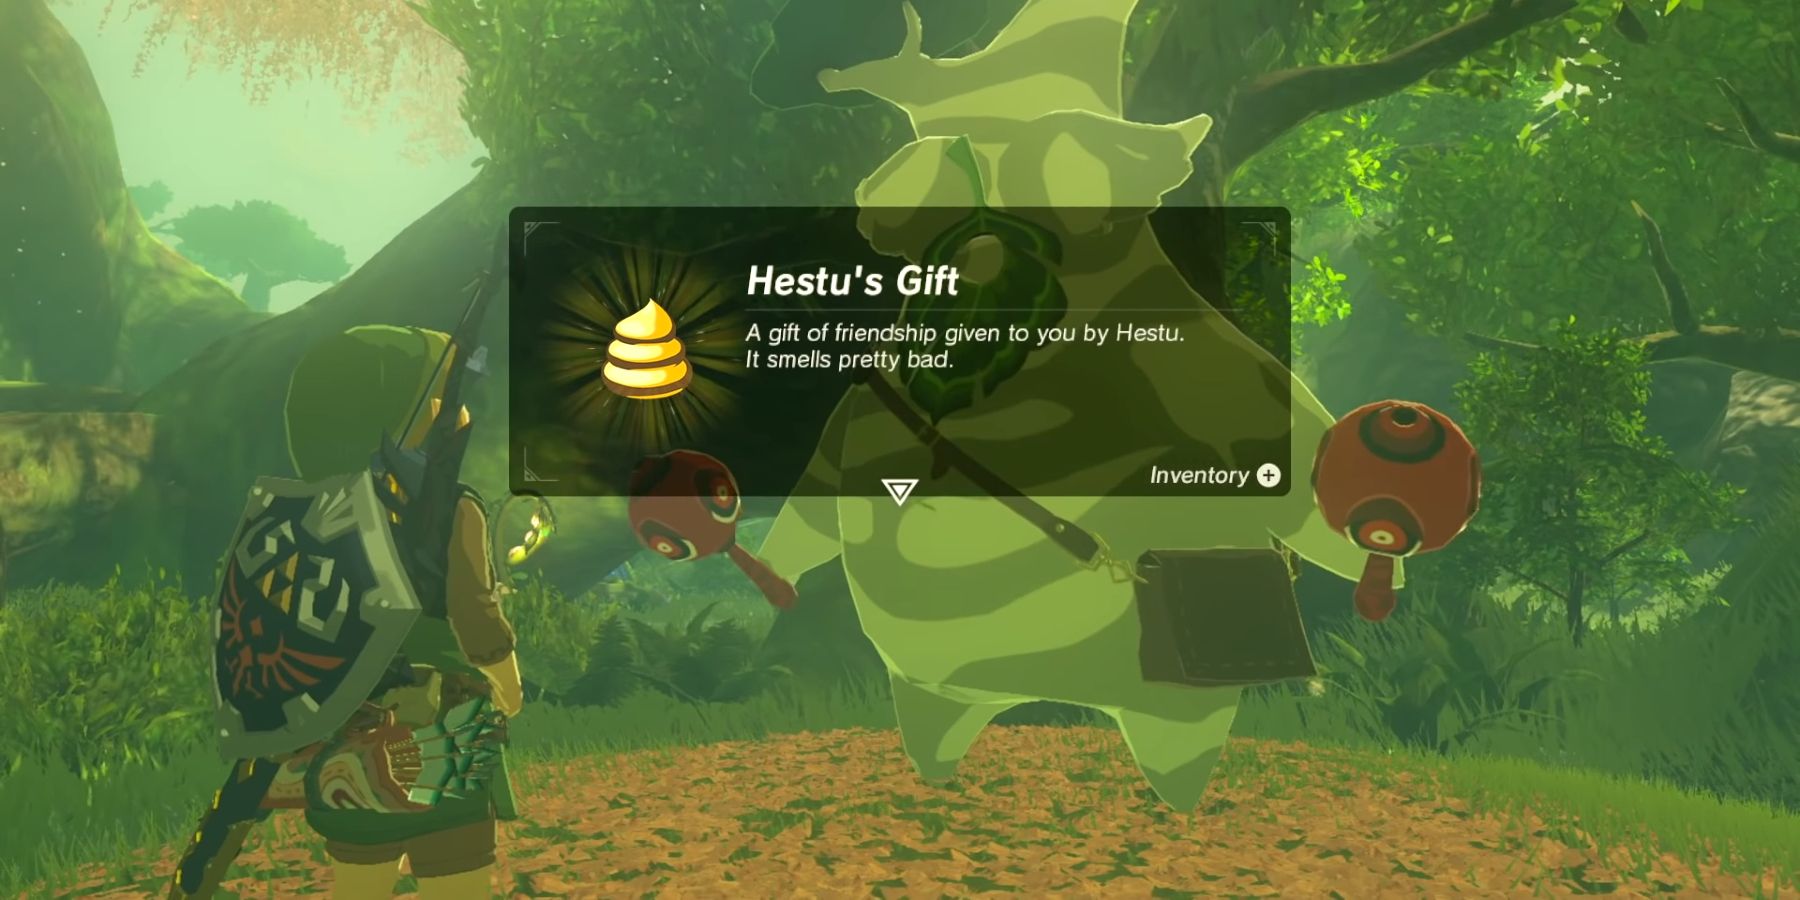 Link being given Hestu's Gift in The Legend Of Zelda: Breath Of The Wild which resembles a pile of poop